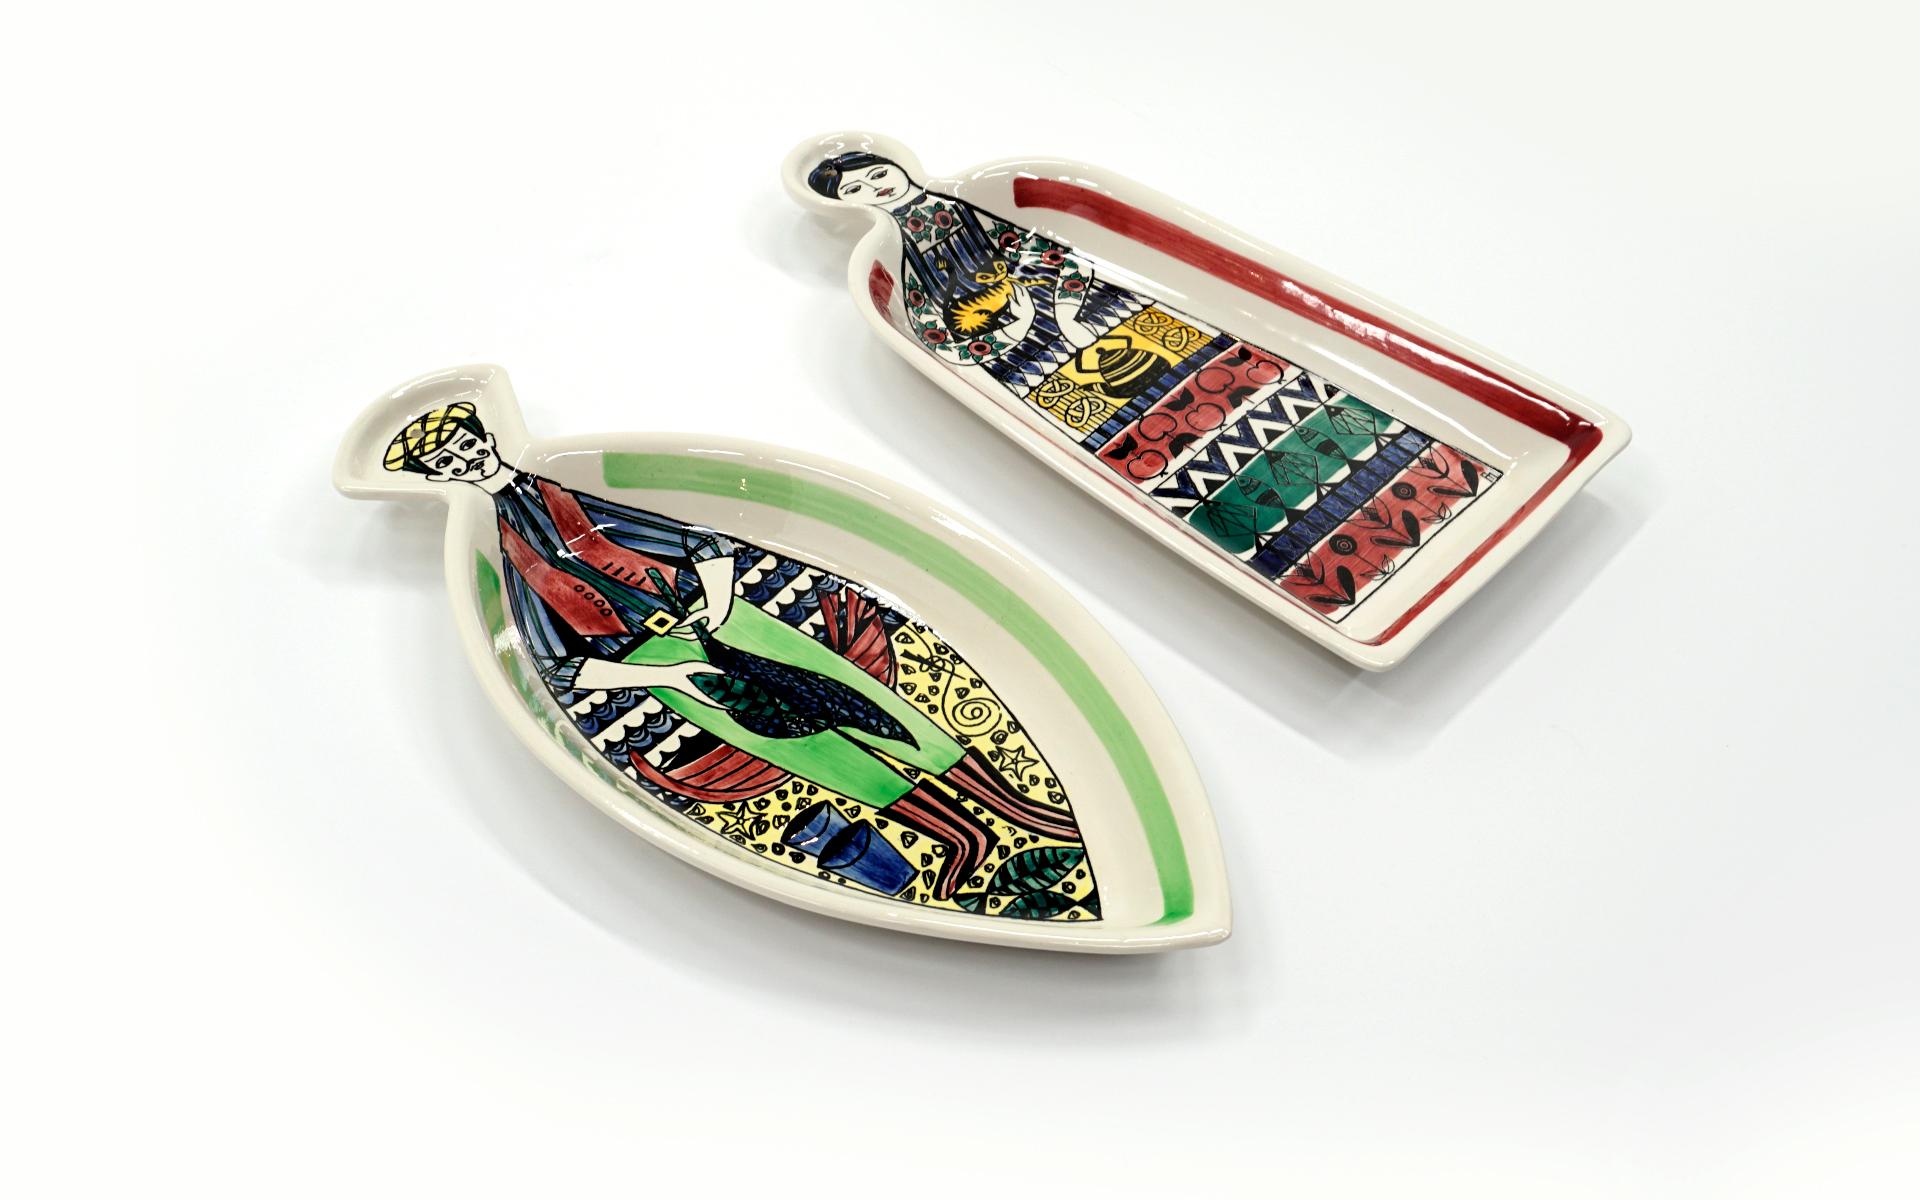 Colorful hand painted functional and decorative serving dishes in the shape of a fish and a bell with male and female figures. Suitable for hanging on the wall as these did for their entire existence. No chips, cracks or scratches. Designed by Anita